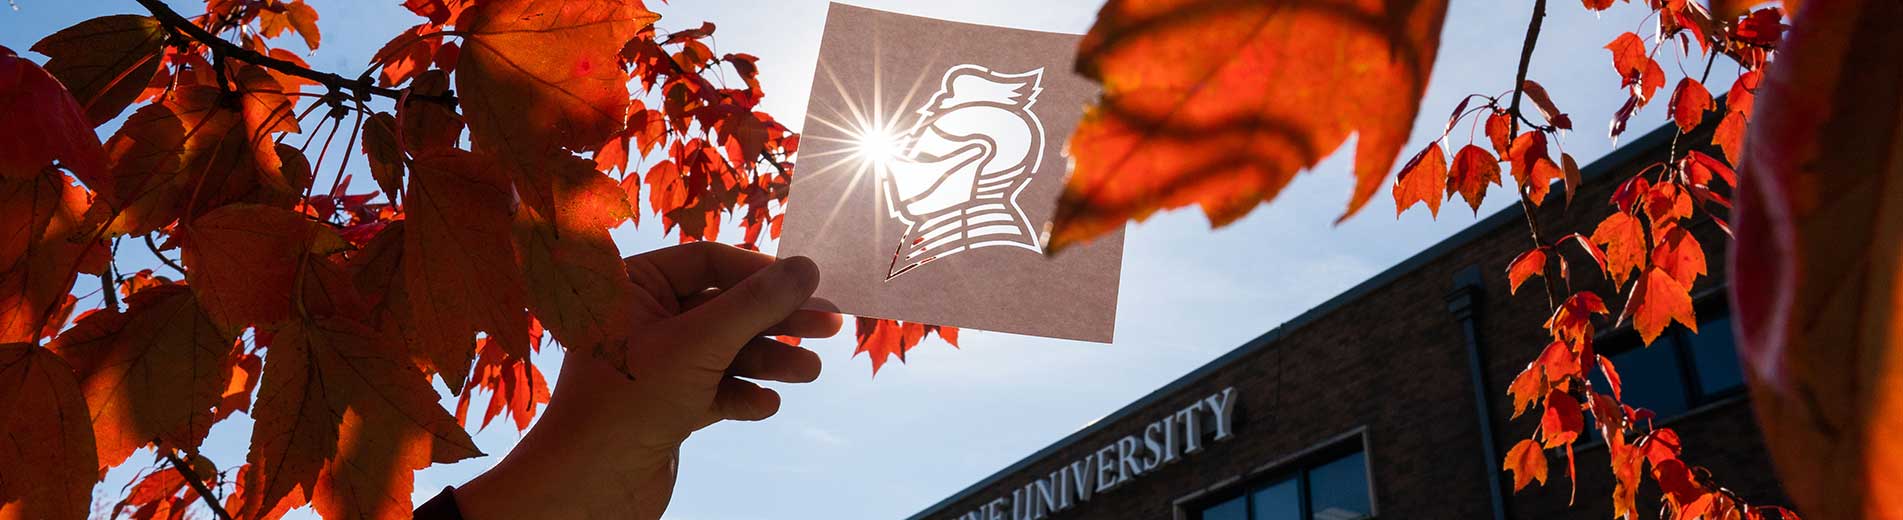 Bellarmine Logo held against the sun outside on campus